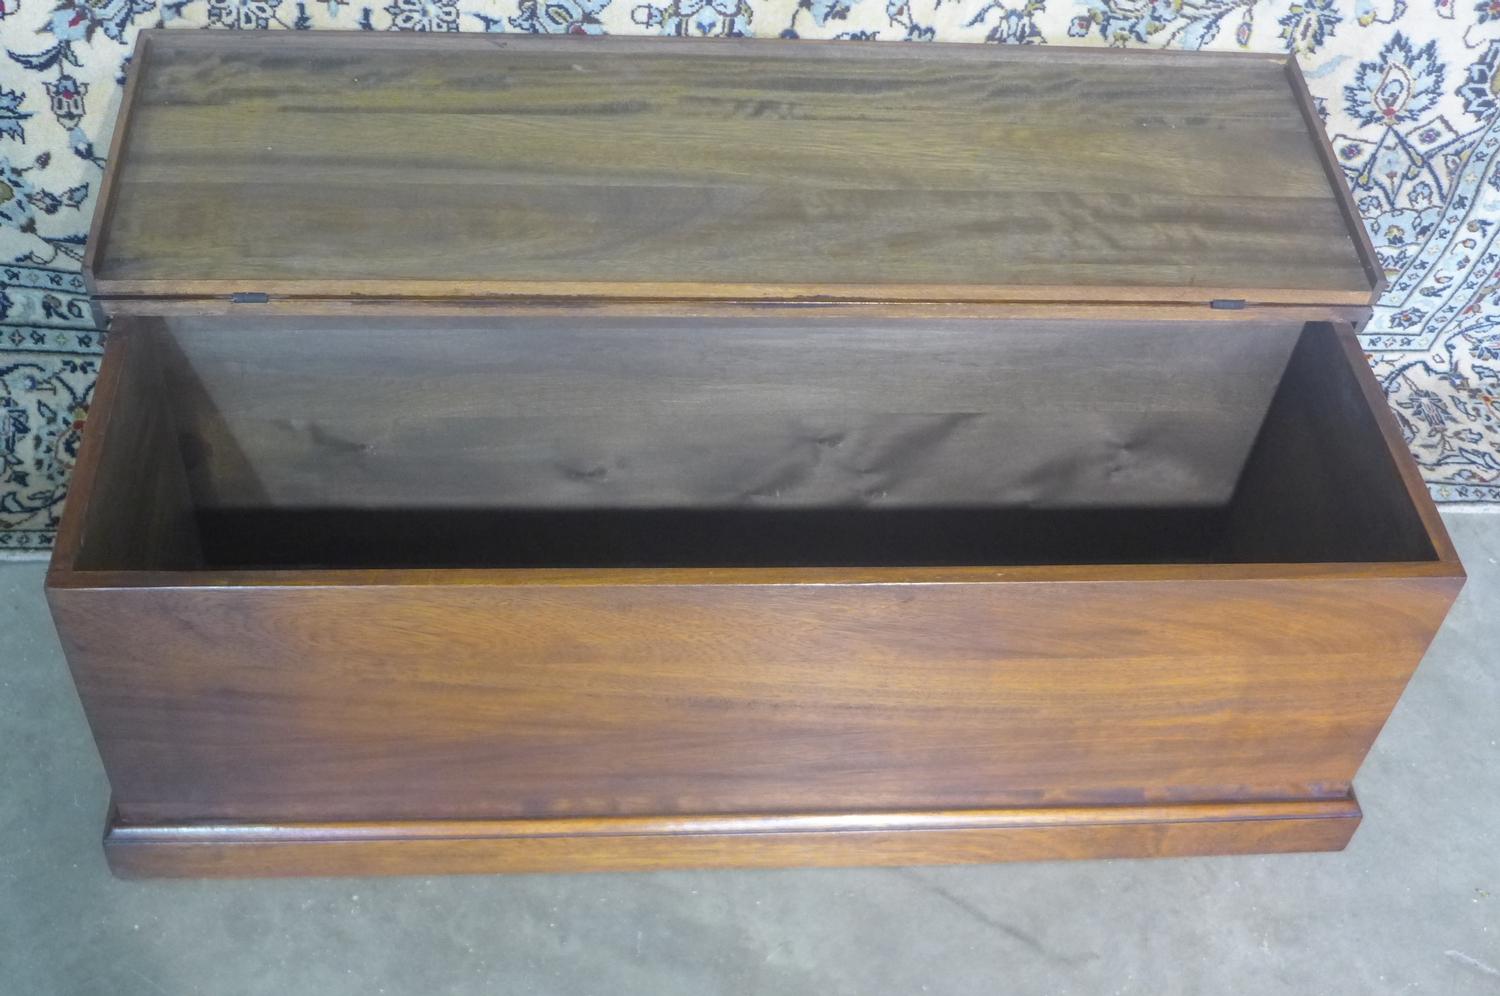 A mahogany blanket chest, storage box, made by a local craftsman to a high standard